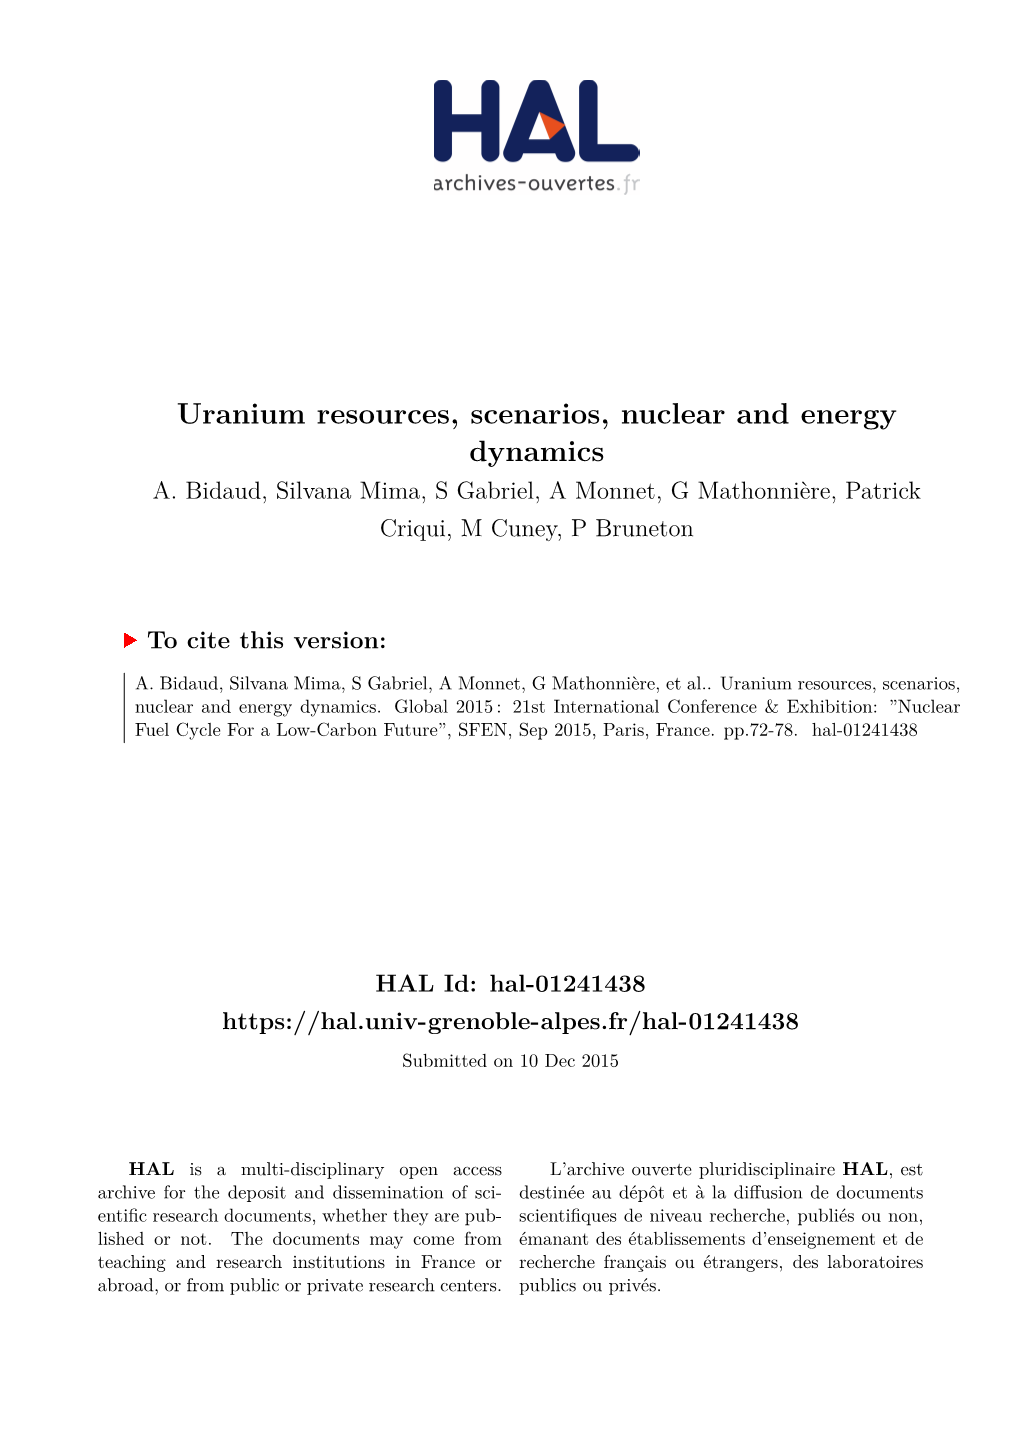 Uranium Resources, Scenarios, Nuclear and Energy Dynamics A